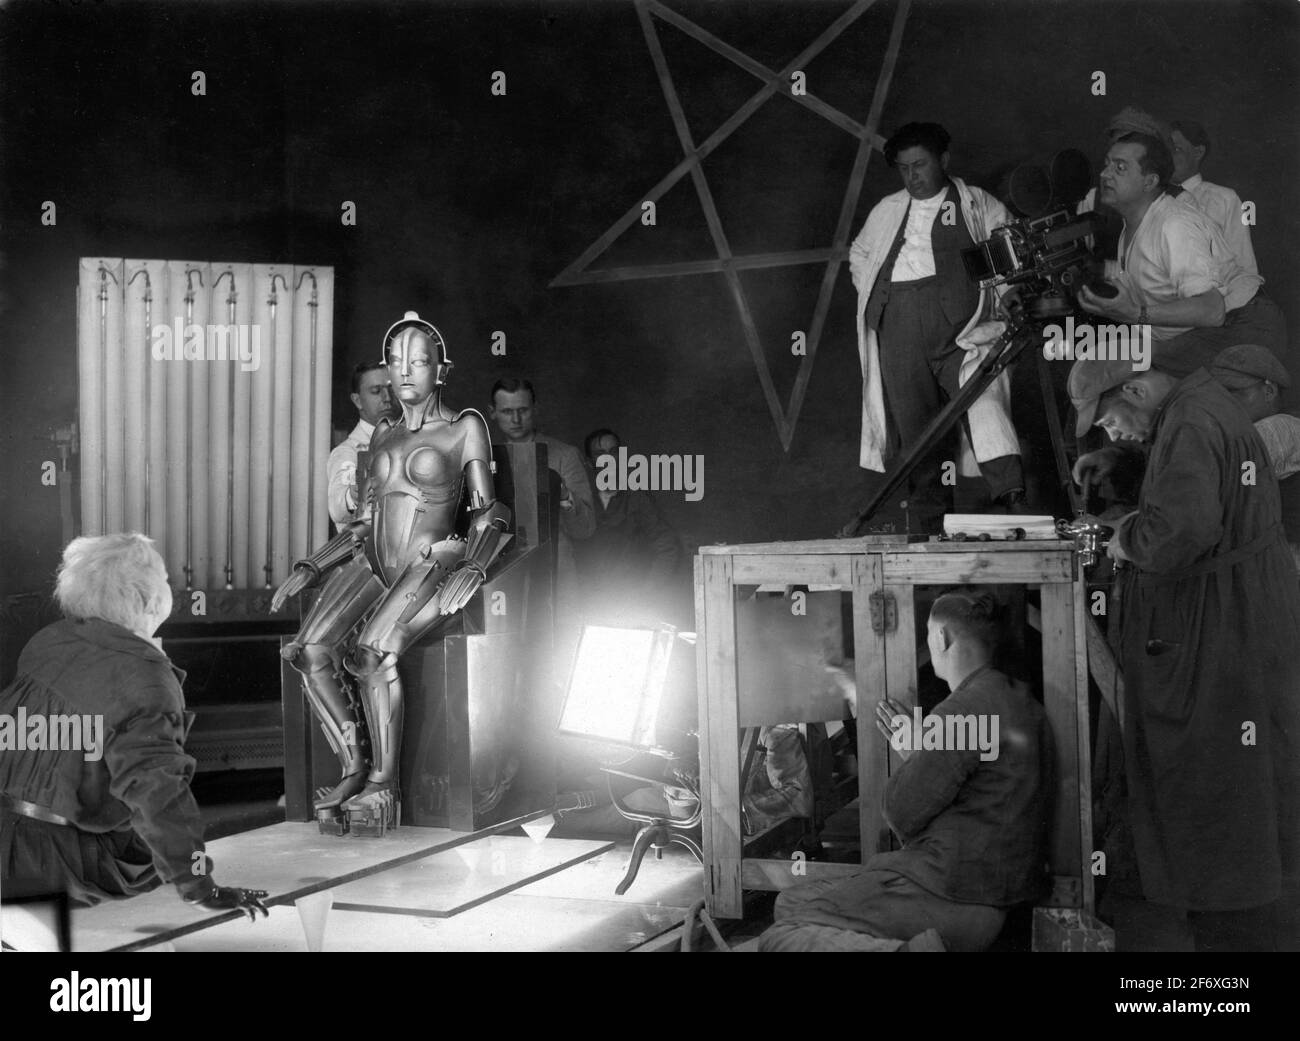 Director FRITZ LANG and Cinematographer KARL FREUND (in long coat on platform) with Movie Crew directing RUDOLF KLEIN-ROGGE as the Inventor and BRIGITTE HELM as the Robot on set candid during making of METROPOLIS 1927 director FRITZ LANG novel and screenplay Thea von Harbou Universum Film (UFA) Stock Photo